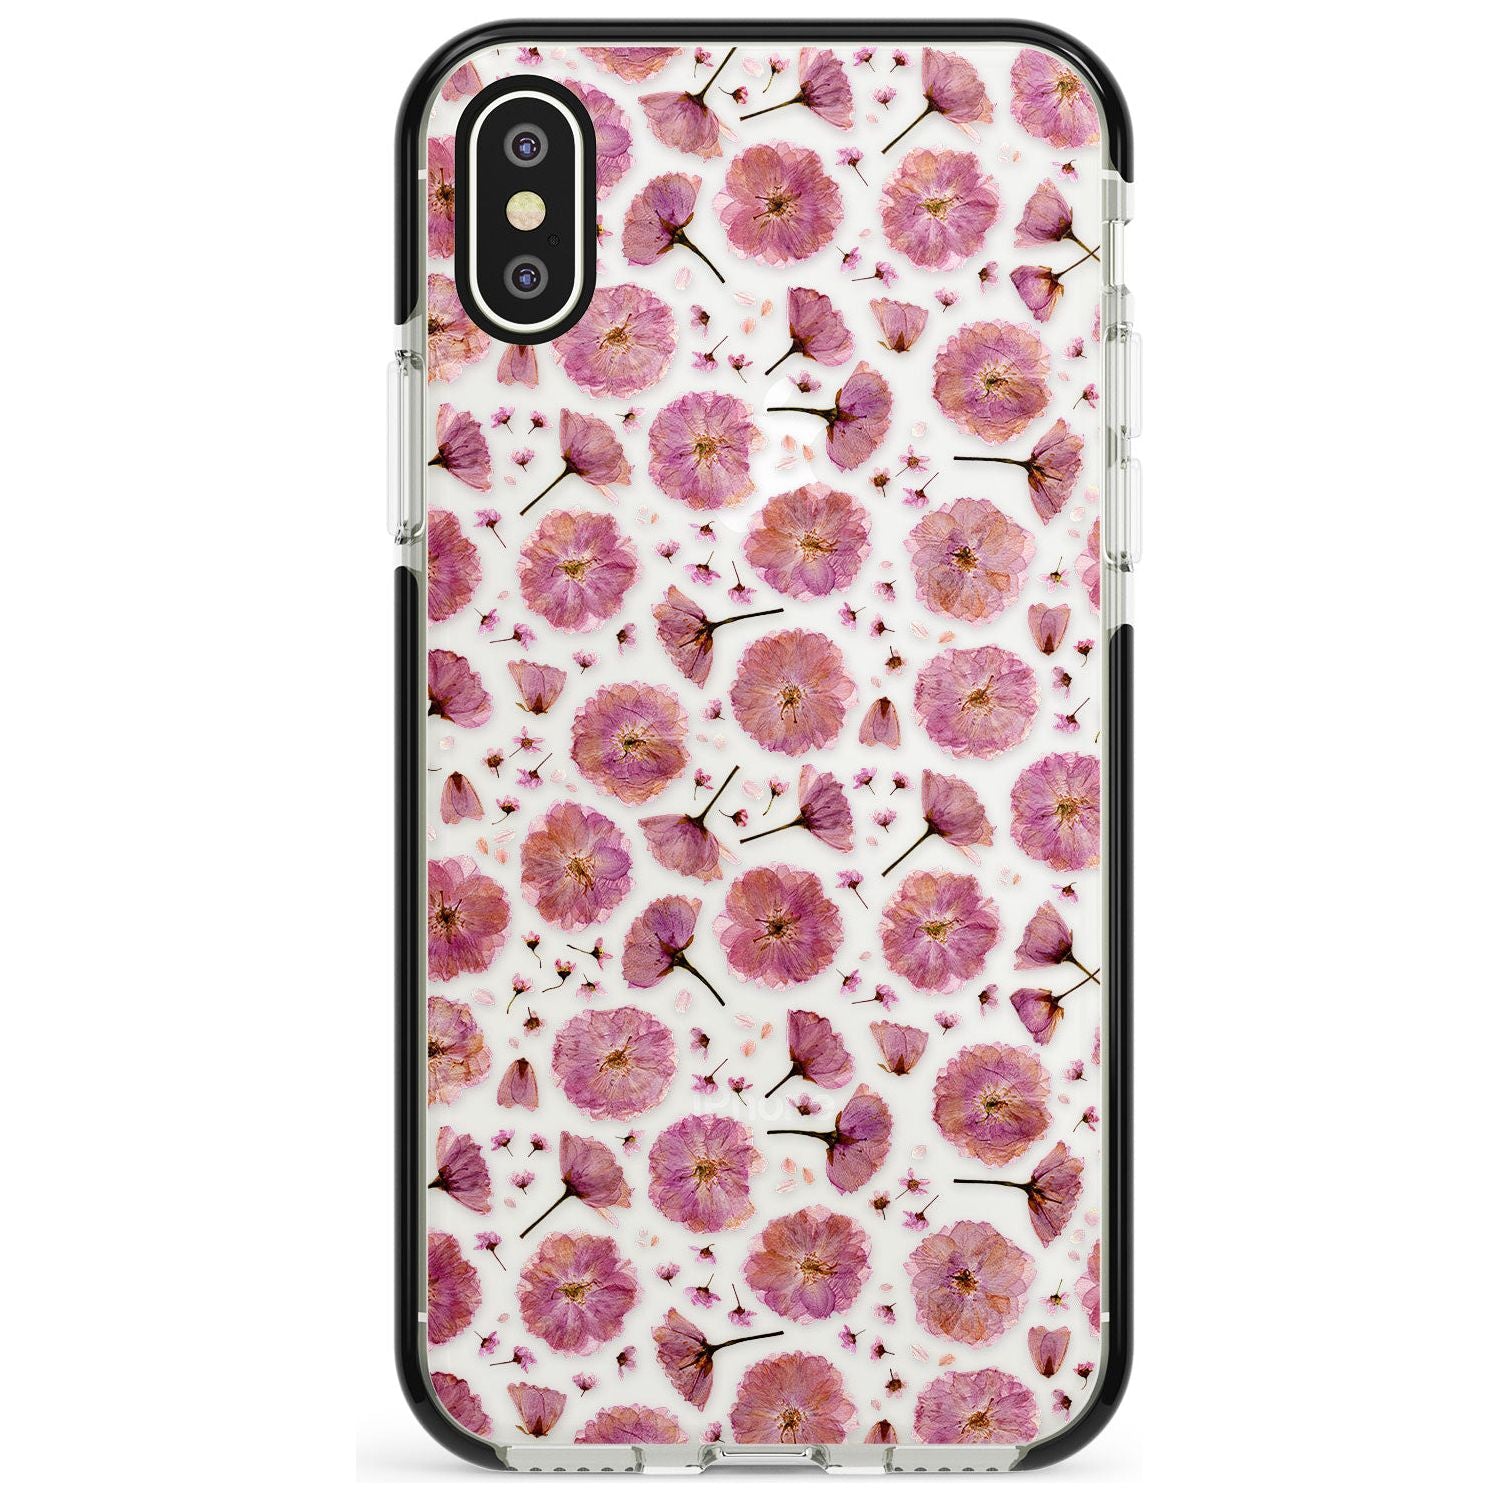 Pink Flowers & Blossoms Transparent Design Black Impact Phone Case for iPhone X XS Max XR